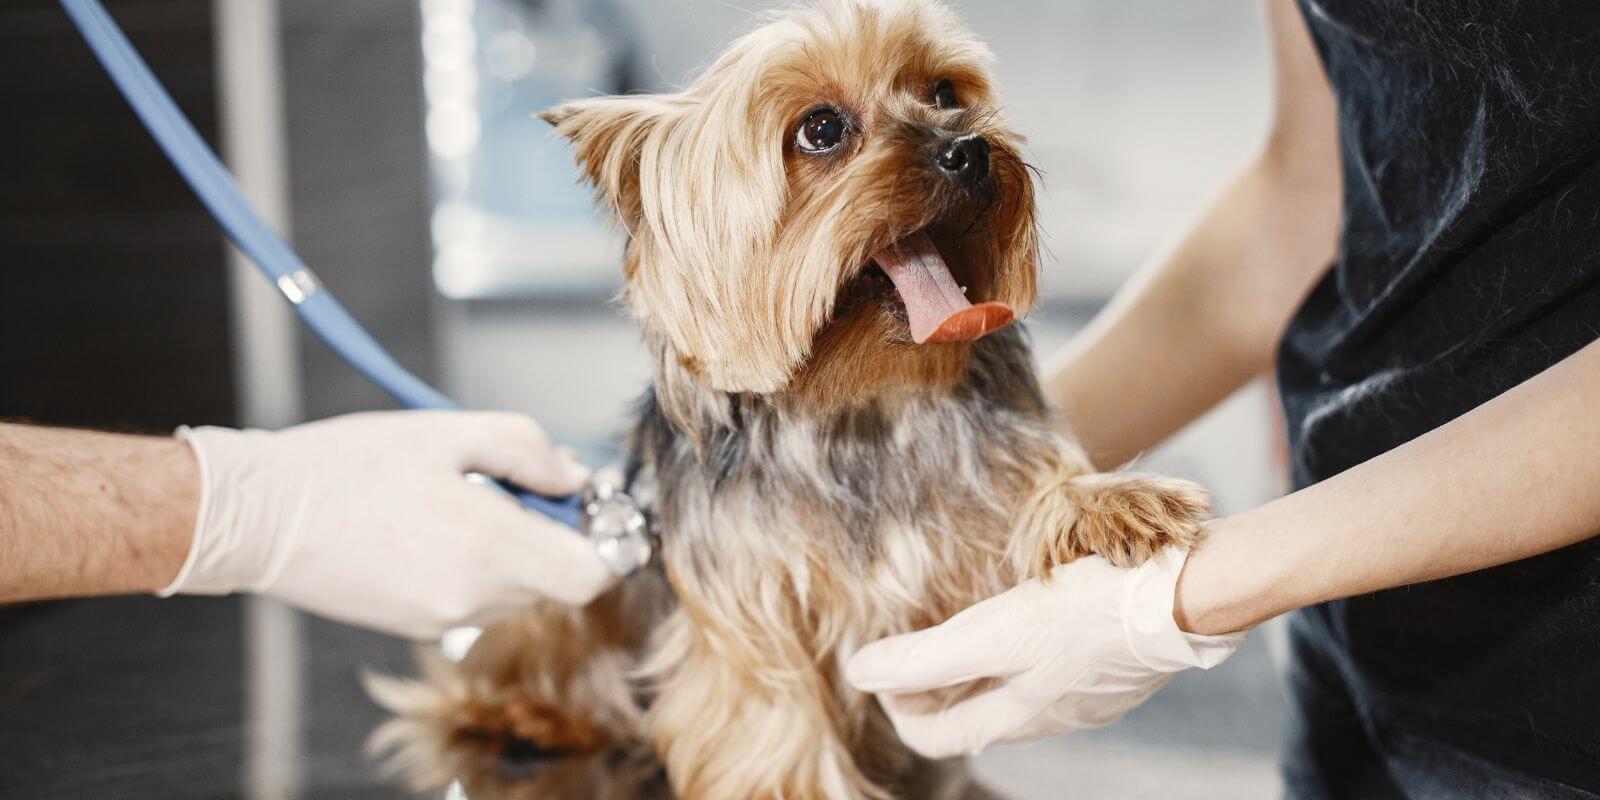 A brown and black Yorkie getting a checkup on a vet table